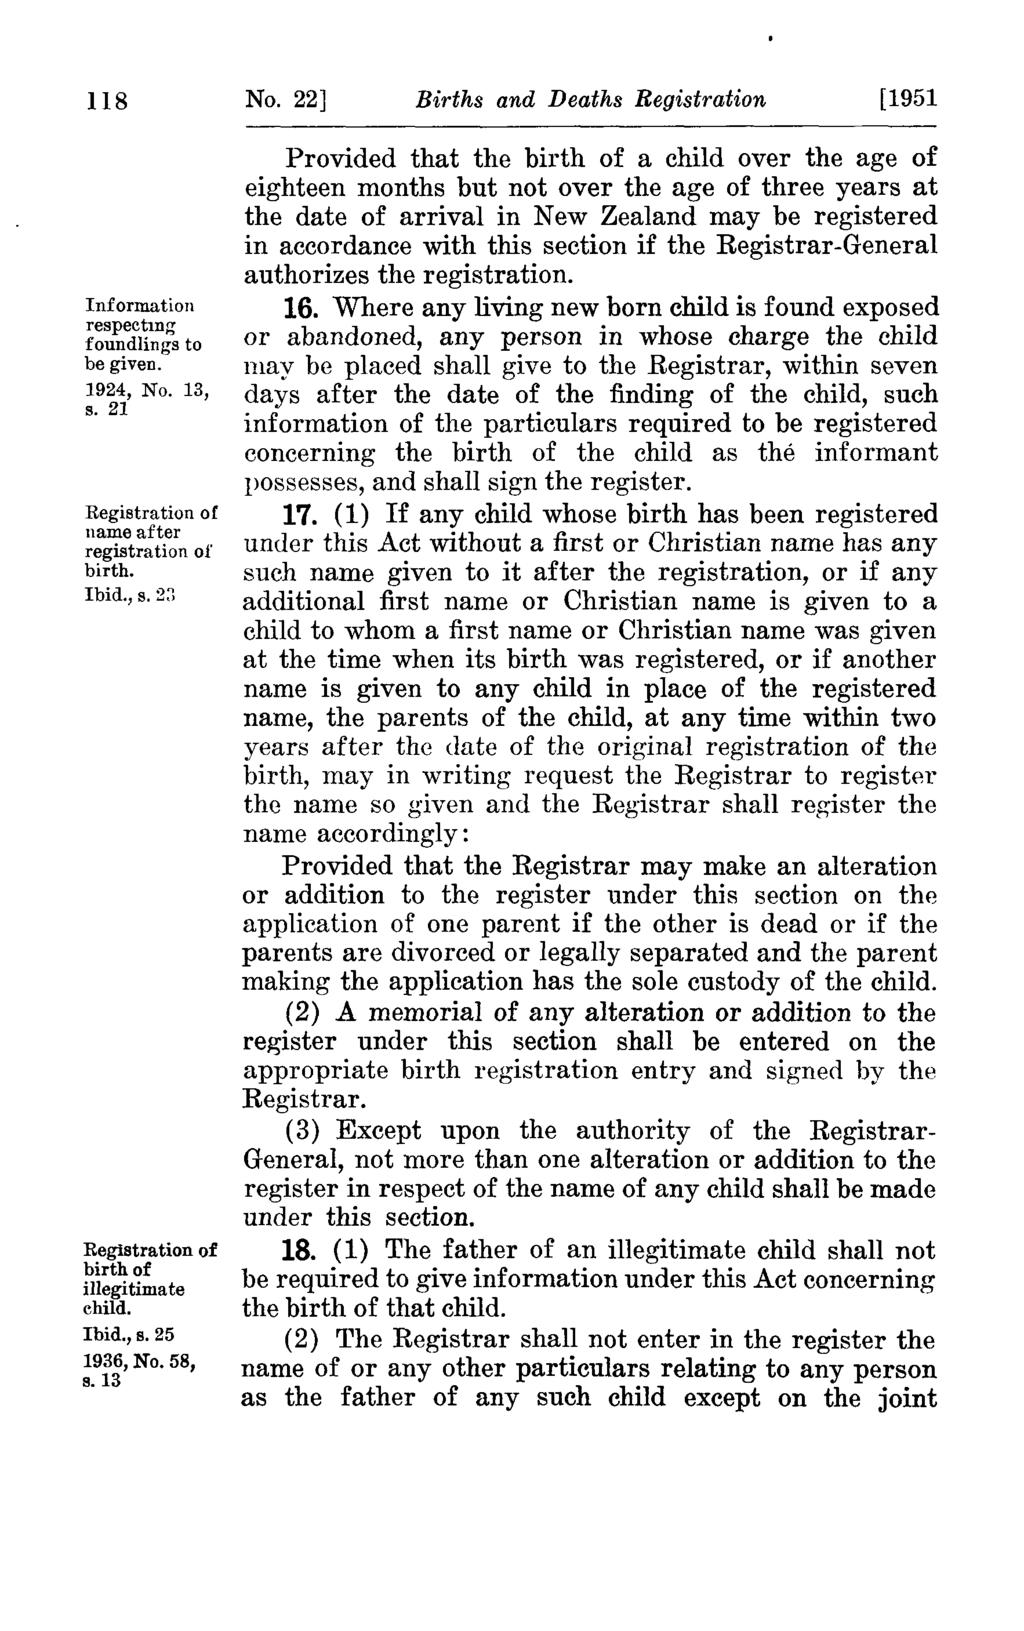 us Information respectmg foundlings to be given. s. 21 Registration of name after registration of birth. Ibid., s. 2:1 Registration of birth of illegi tima te child. Ibid.,s.25 1936, No. 58, s.13 No.